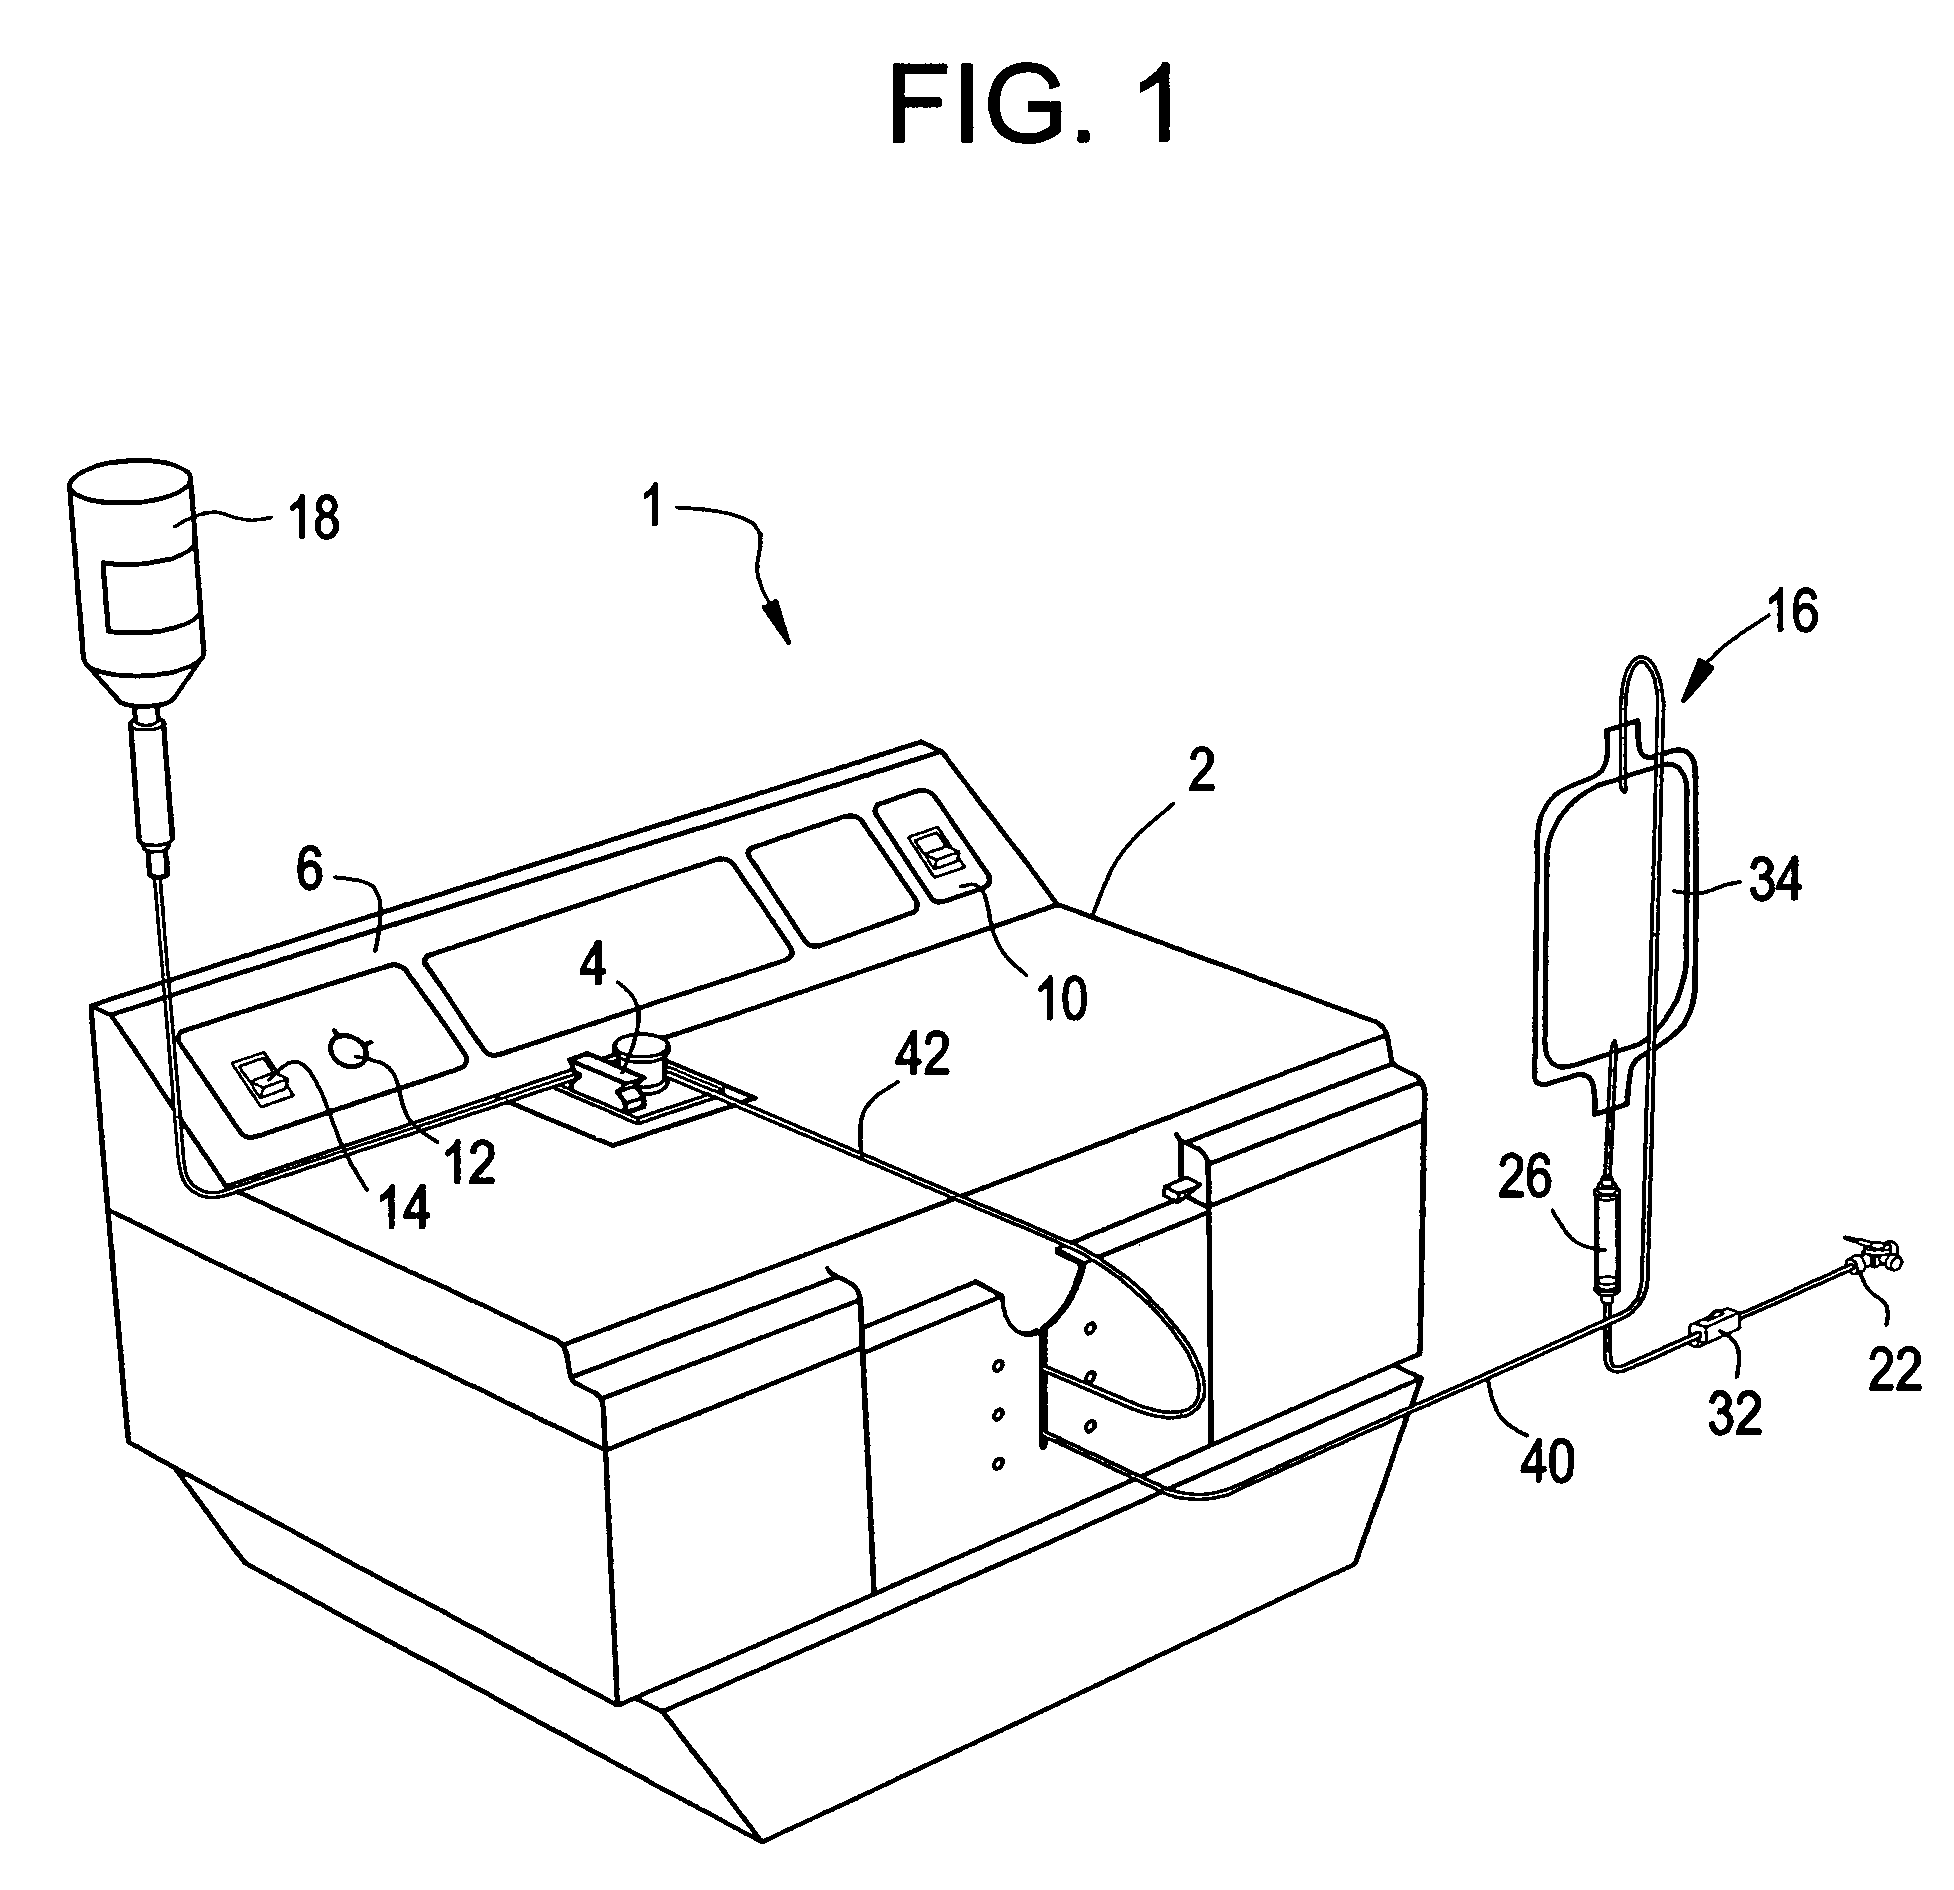 Blood irradiation system, associated devices and methods for irradiating blood